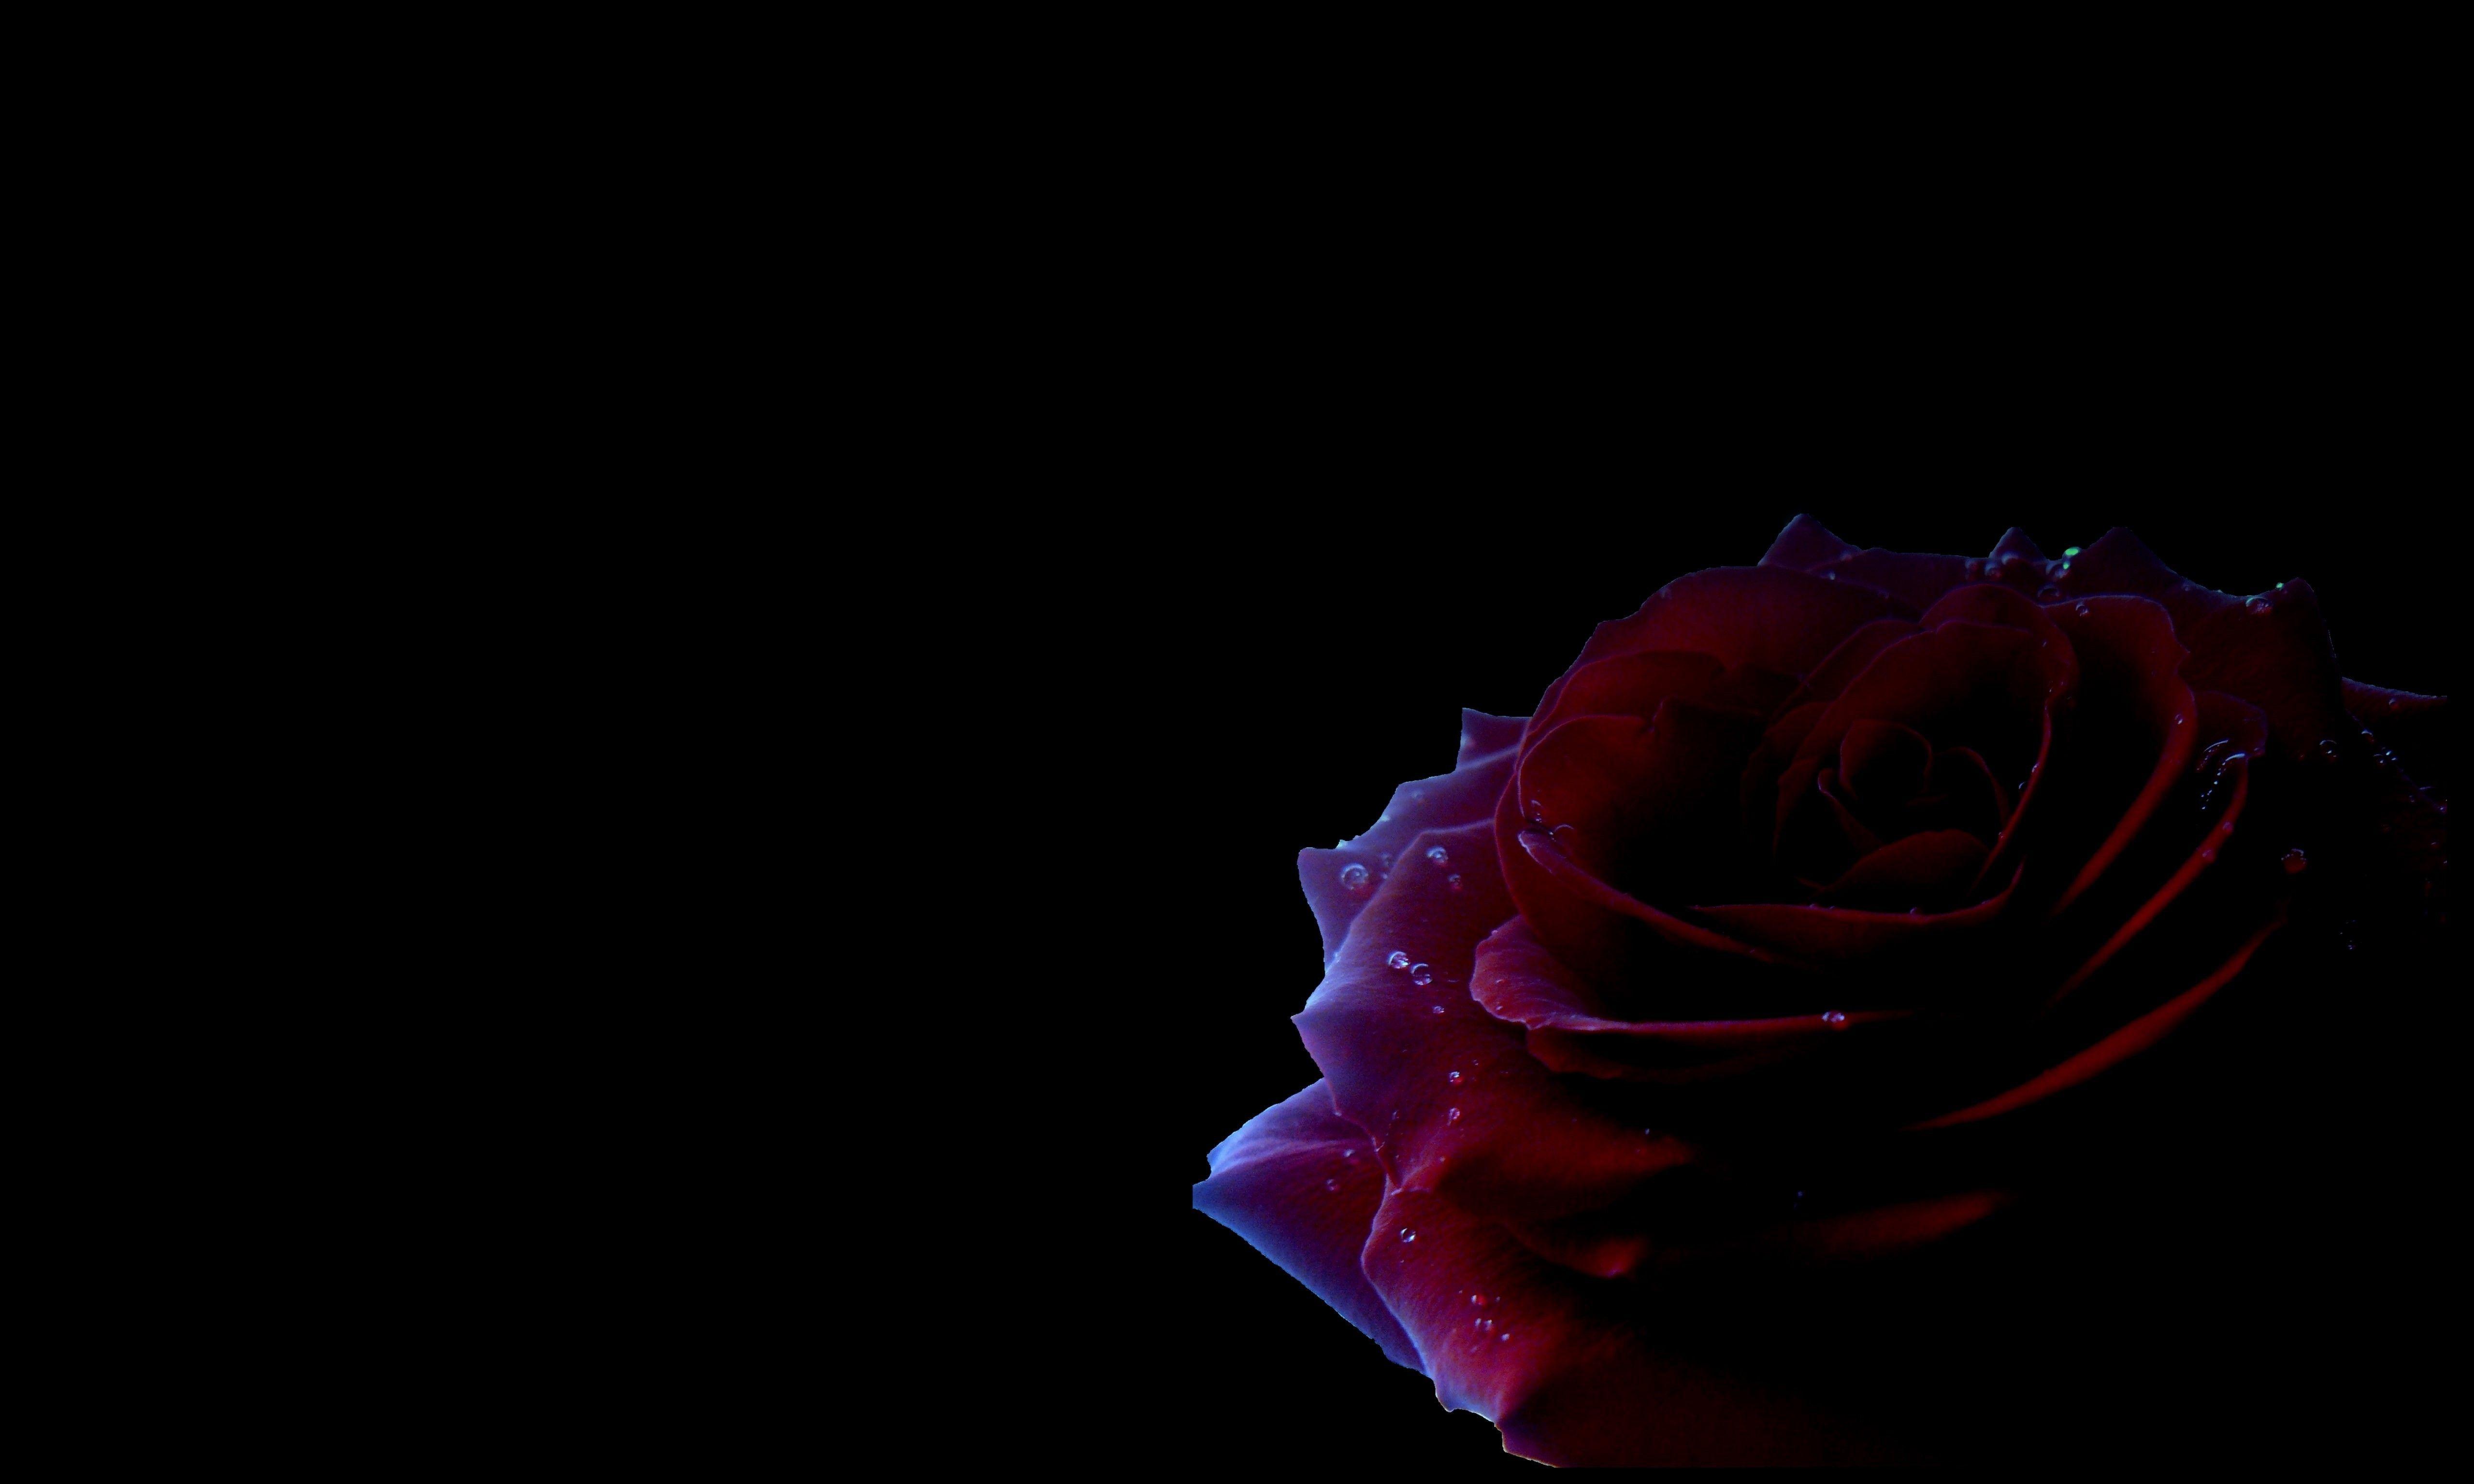 black and red rose wallpaper red and black rose wallpaper 26 cool